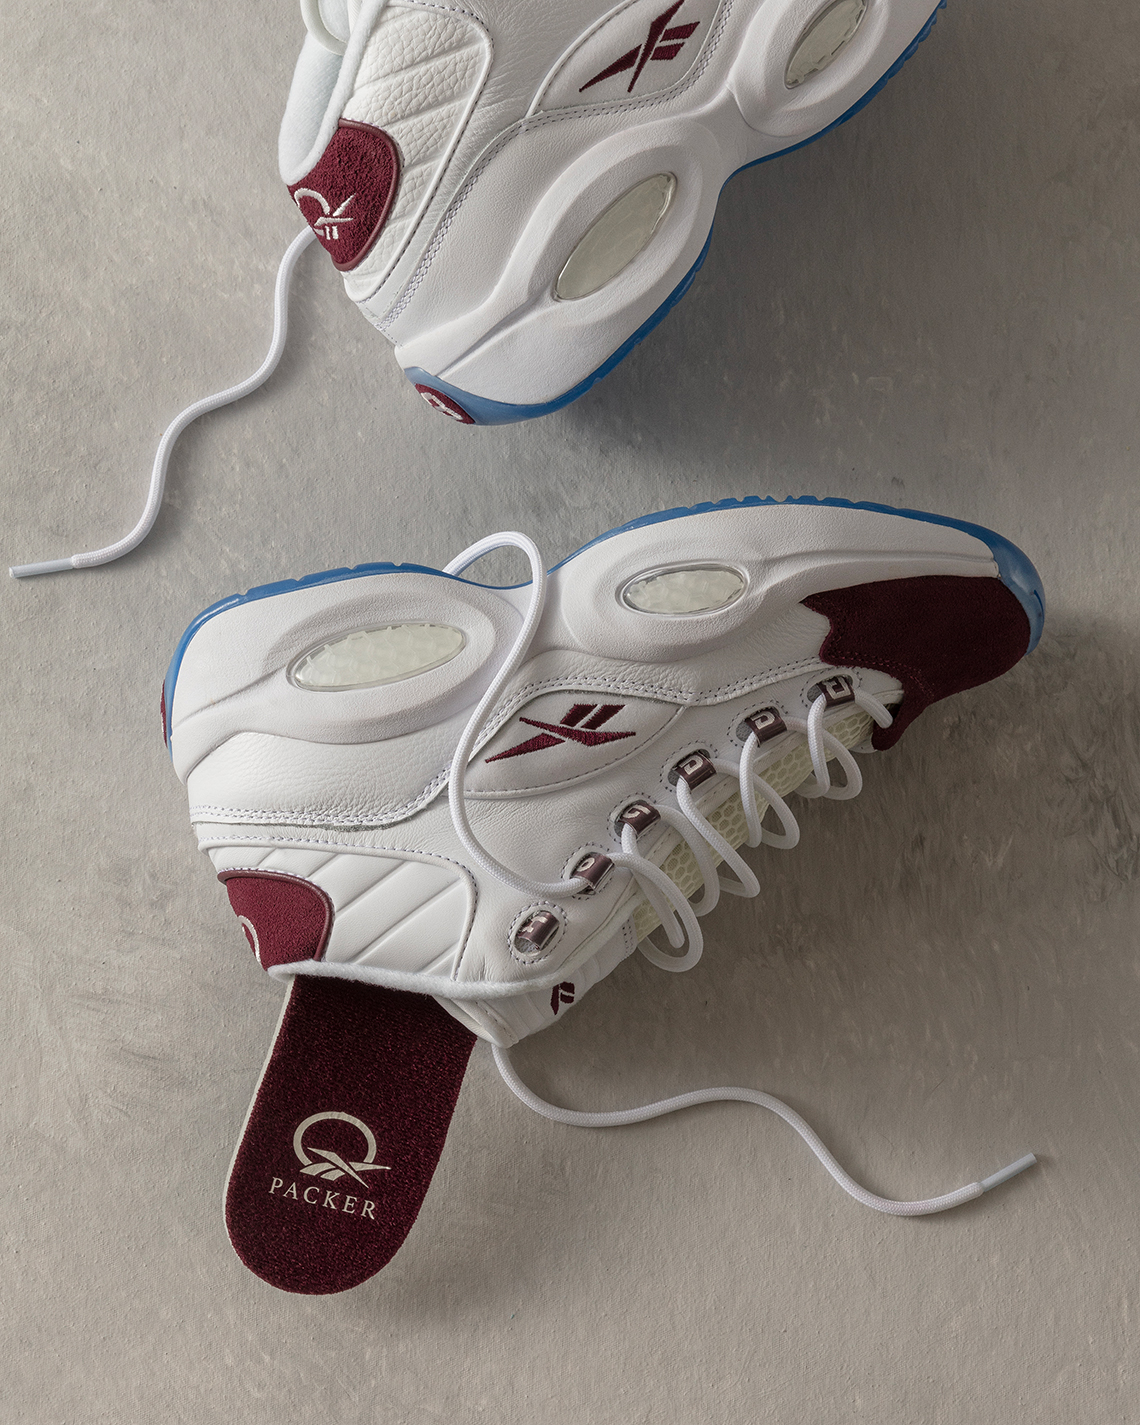 Packer And Omni Reebok Are Releasing A Collaboration This Friday Burgundy Suede Release Date 7